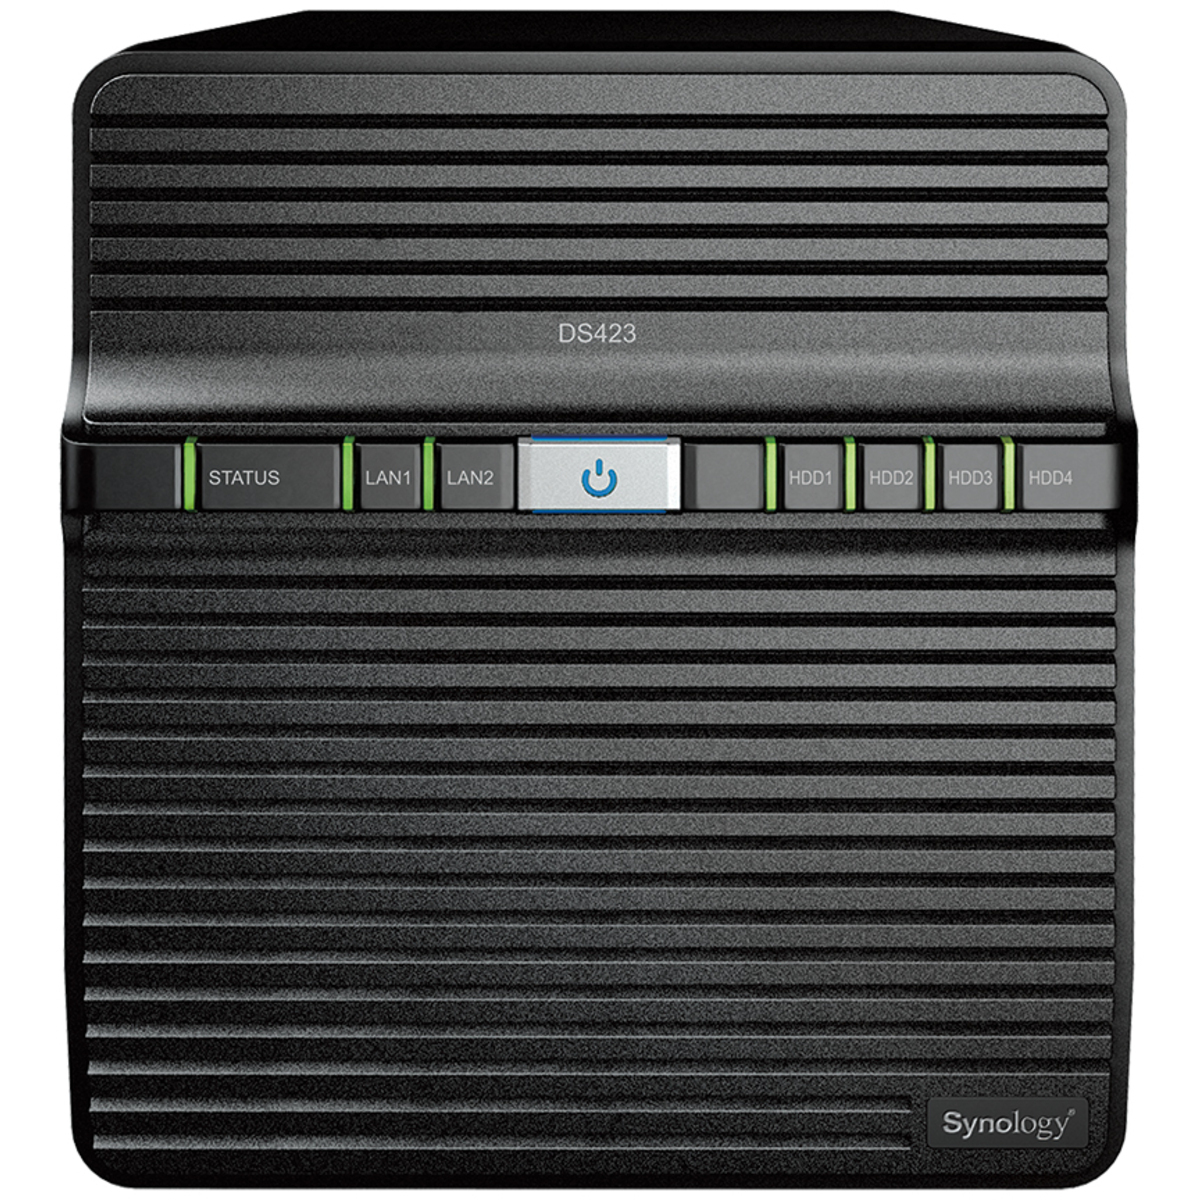 Synology DiskStation DS423 44tb 4-Bay Desktop Personal / Basic Home / Small Office NAS - Network Attached Storage Device 2x22tb Seagate EXOS X22 ST22000NM001E 3.5 7200rpm SATA 6Gb/s HDD ENTERPRISE Class Drives Installed - Burn-In Tested DiskStation DS423